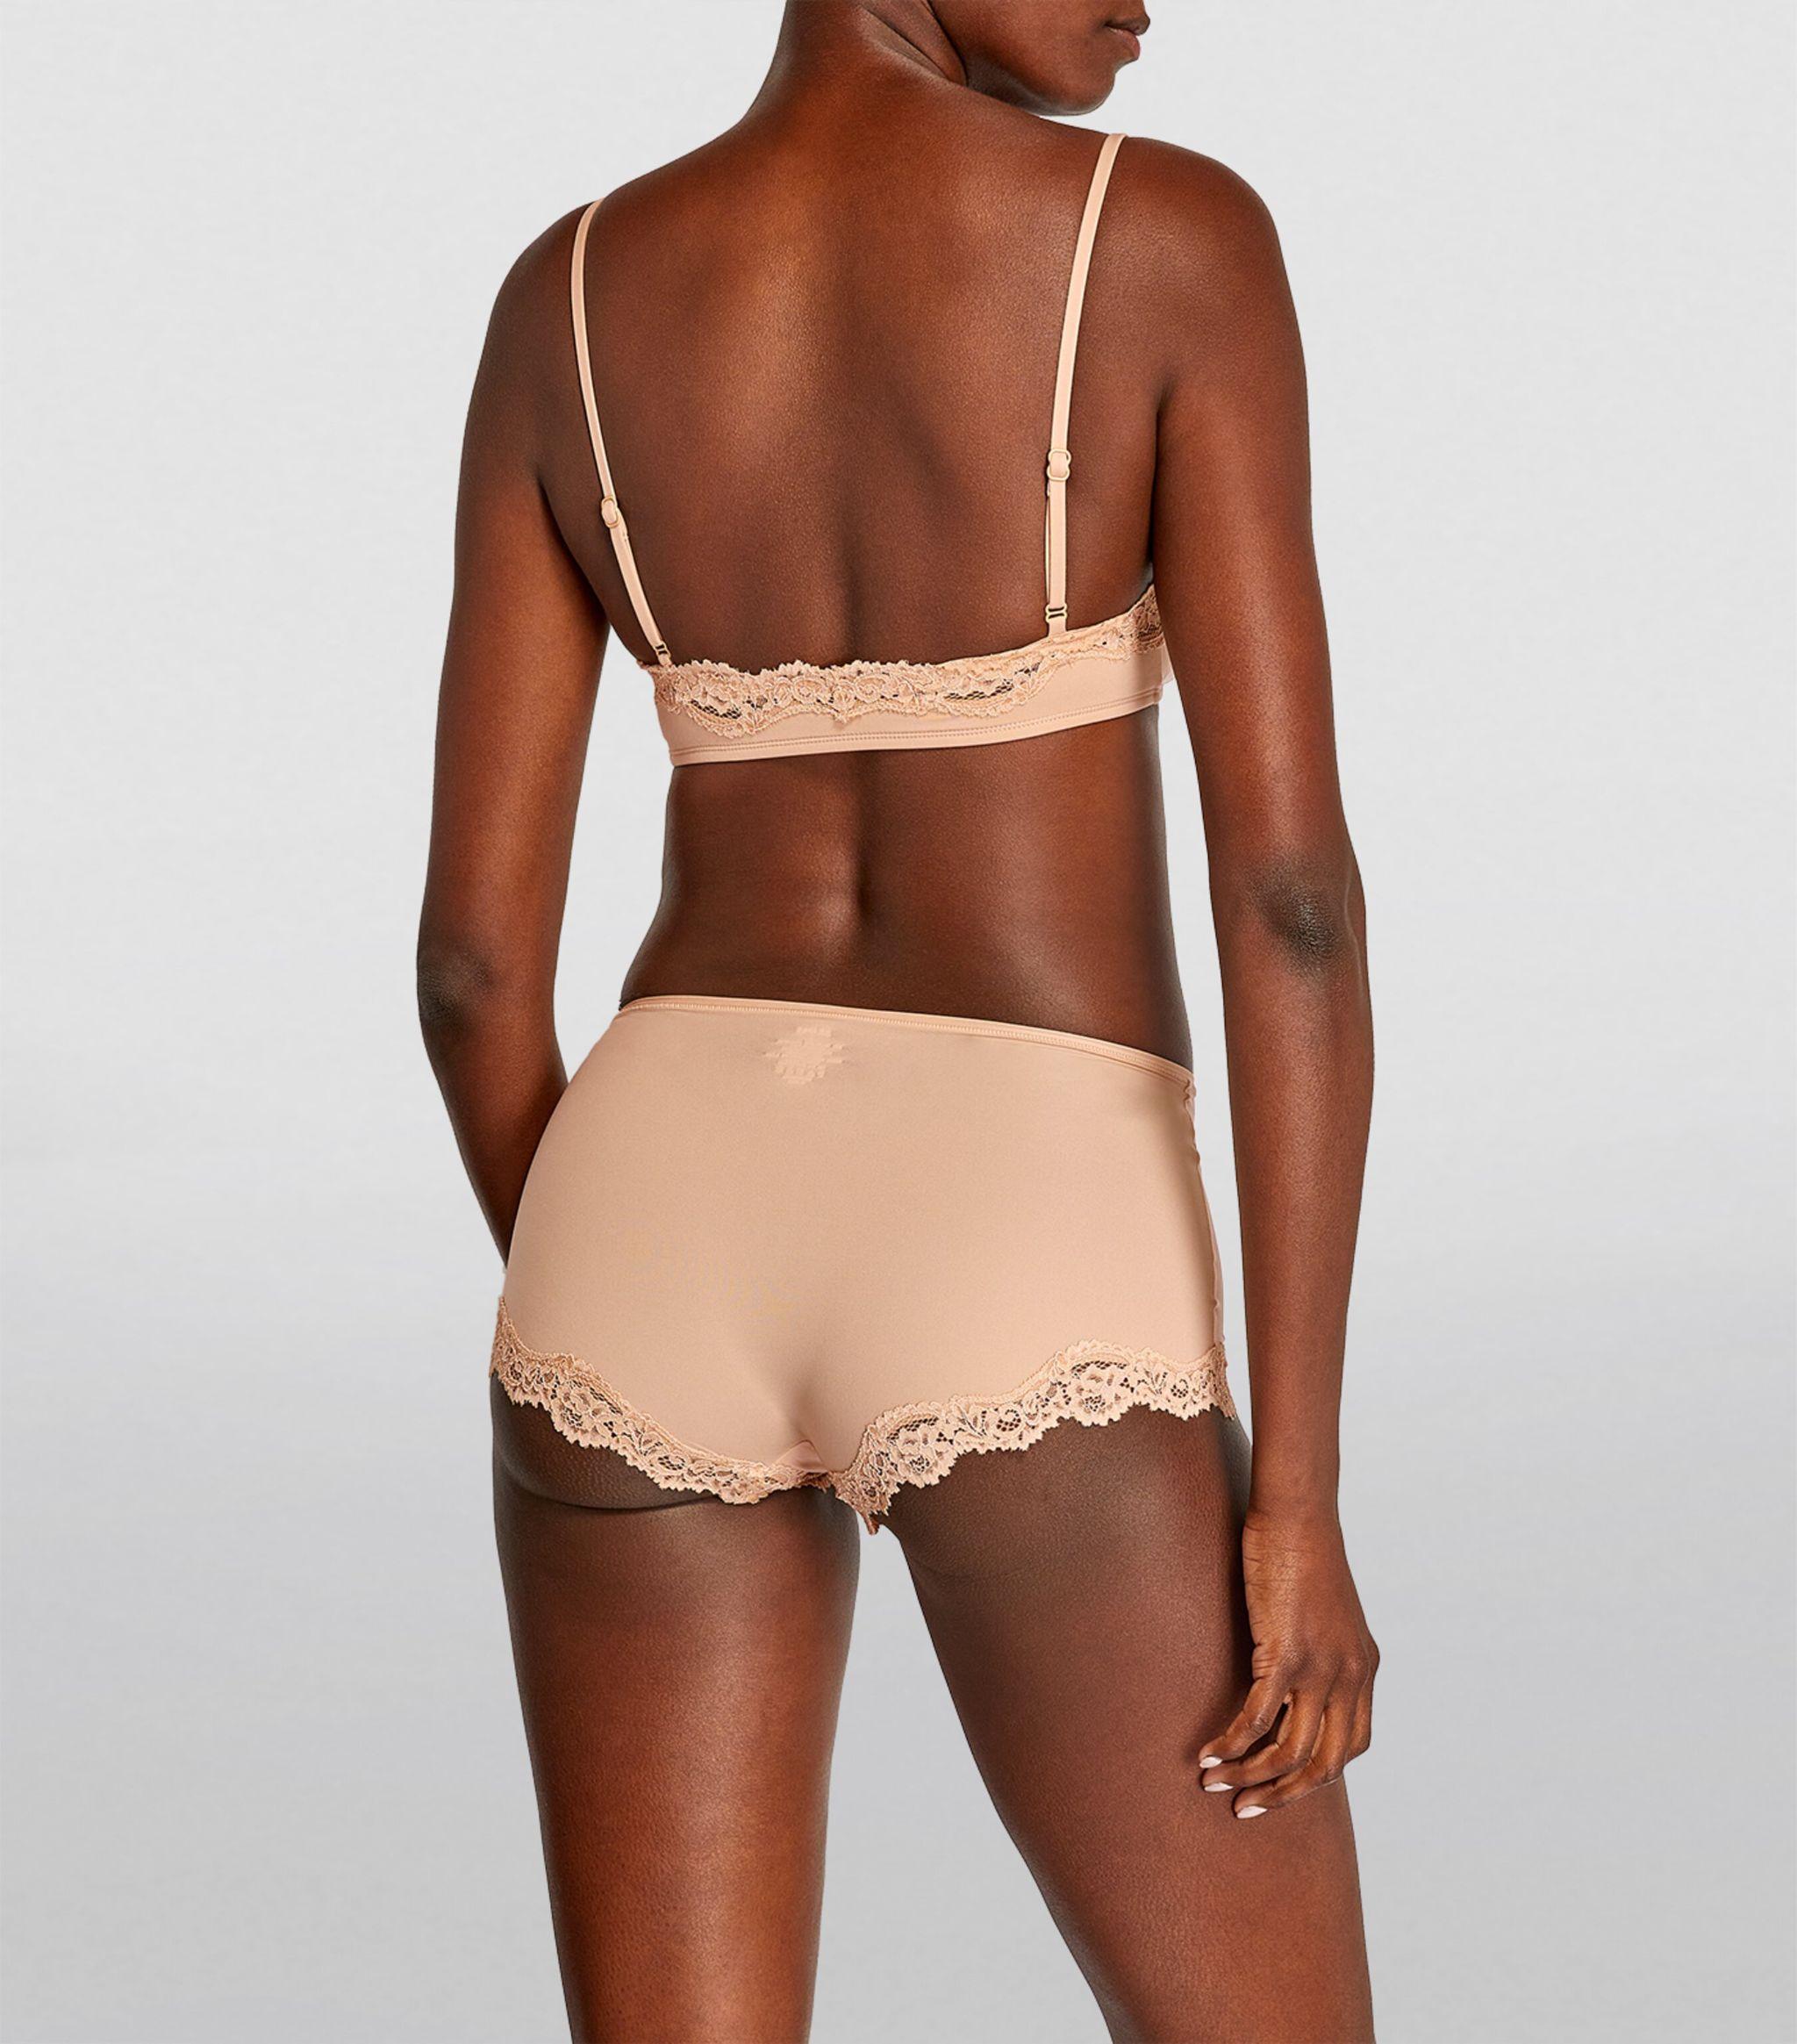 Skims Fits Everybody Lace-trim Scoop Bralette in Natural